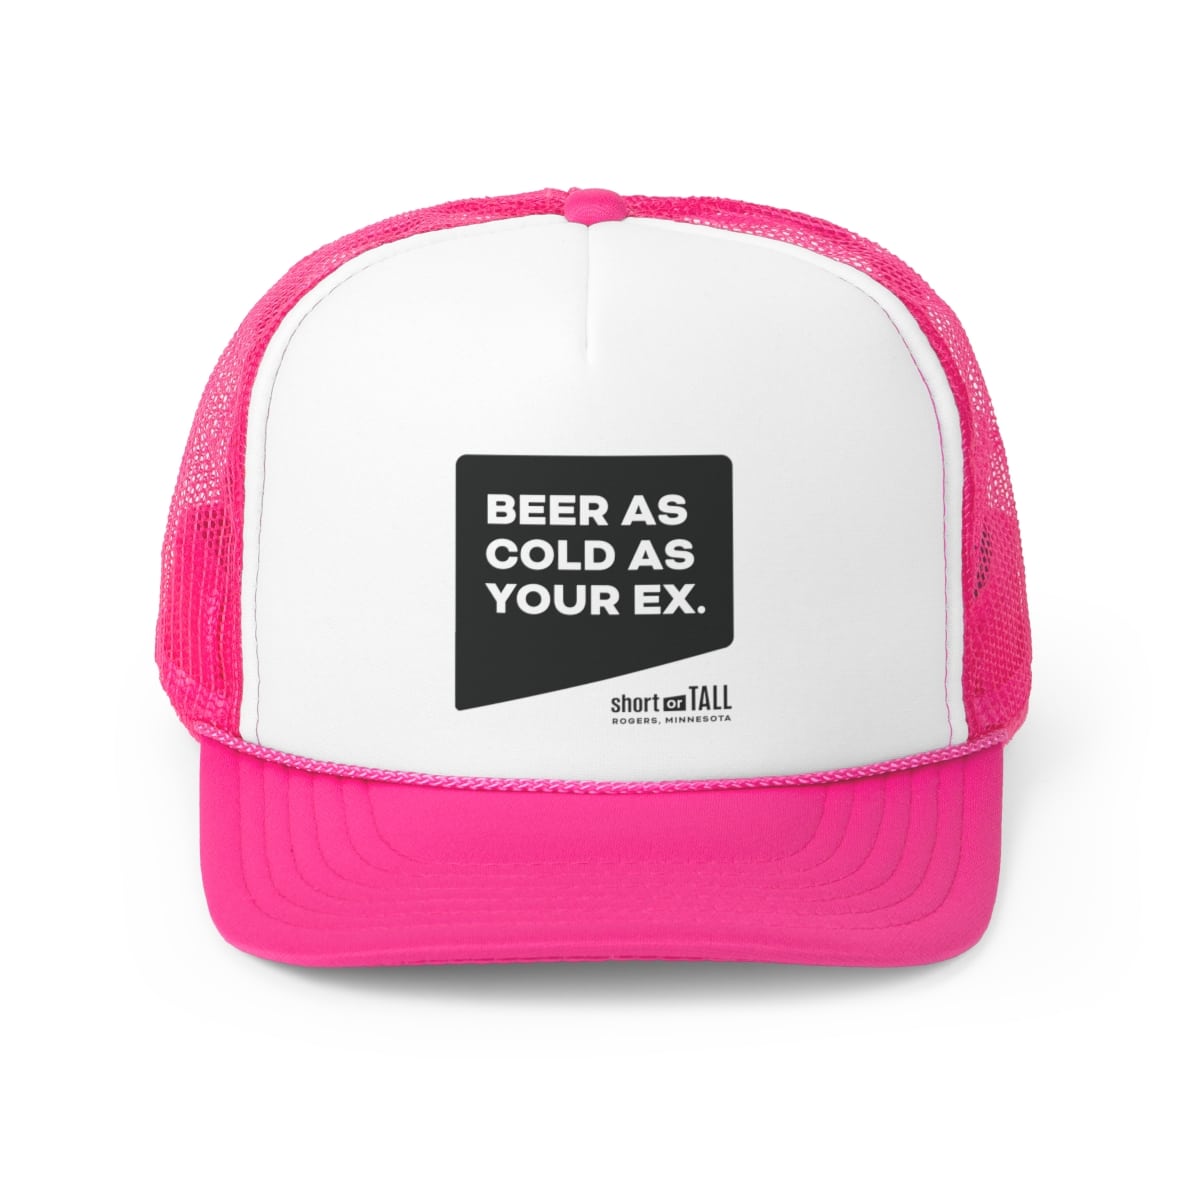 “Beer As Cold As Your Ex” Trucker Cap